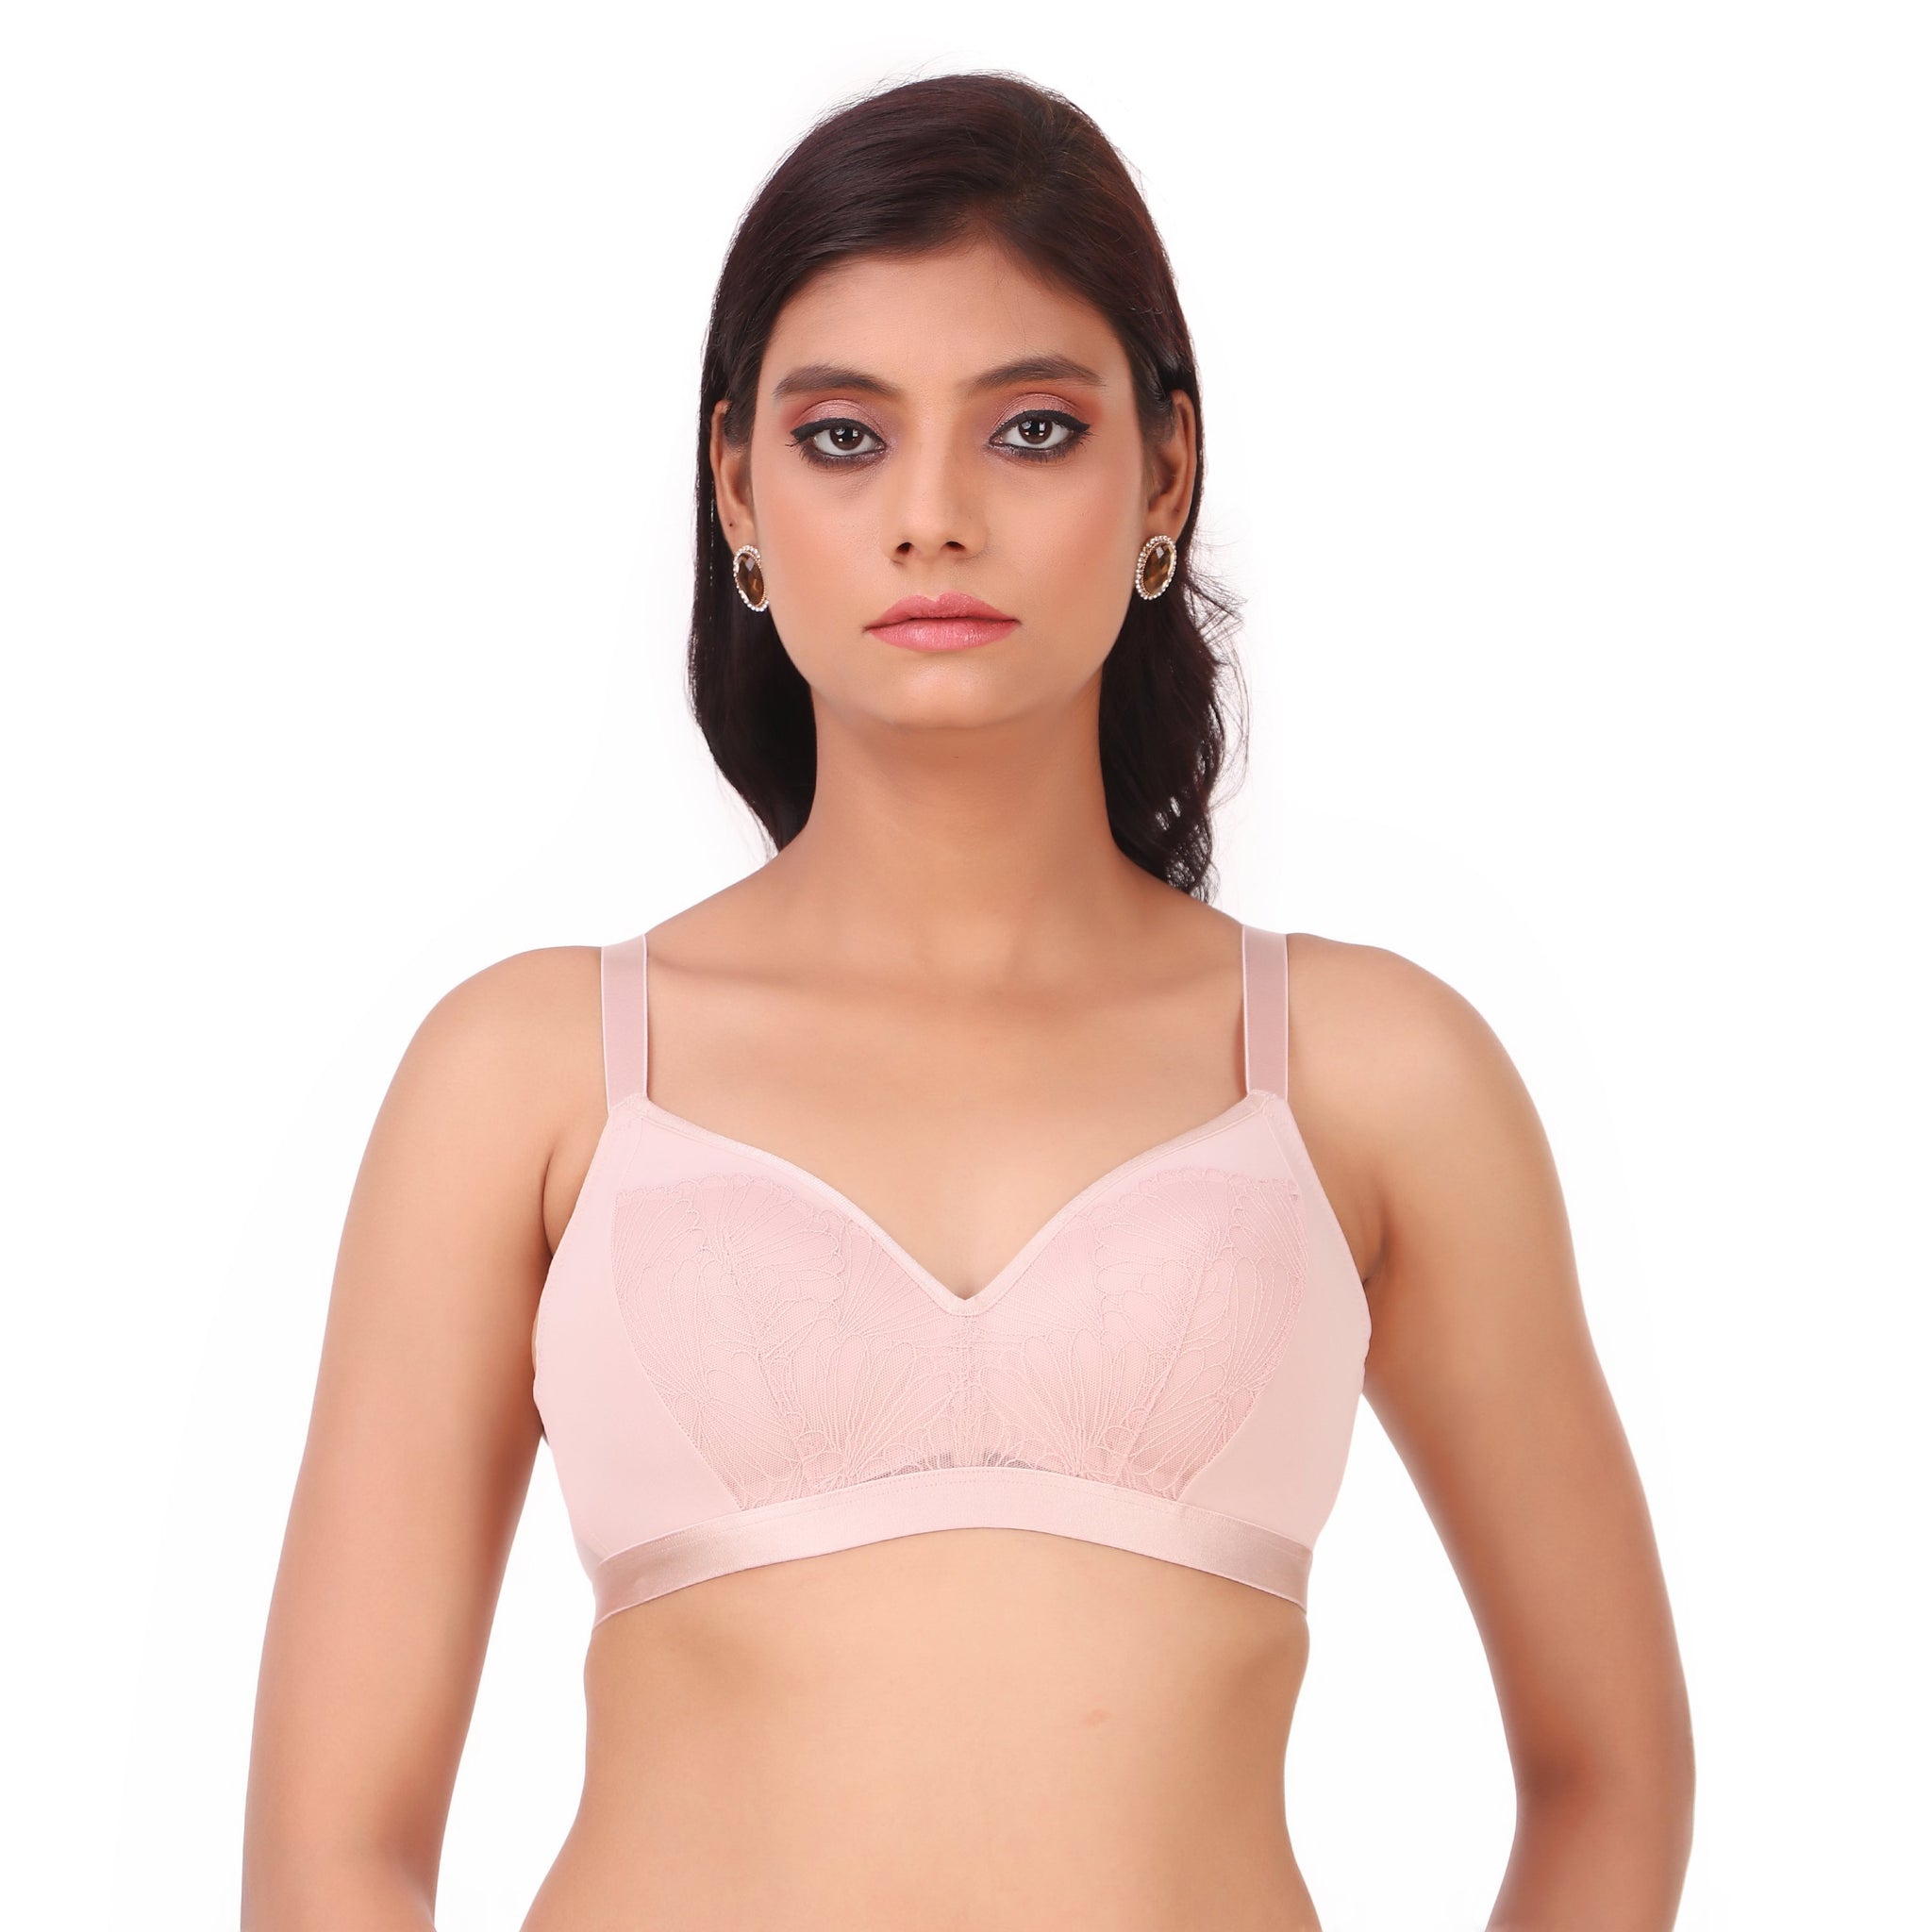 TRIUMPH-110I574 Non-Wired Lightly Padded T-shirt Bra